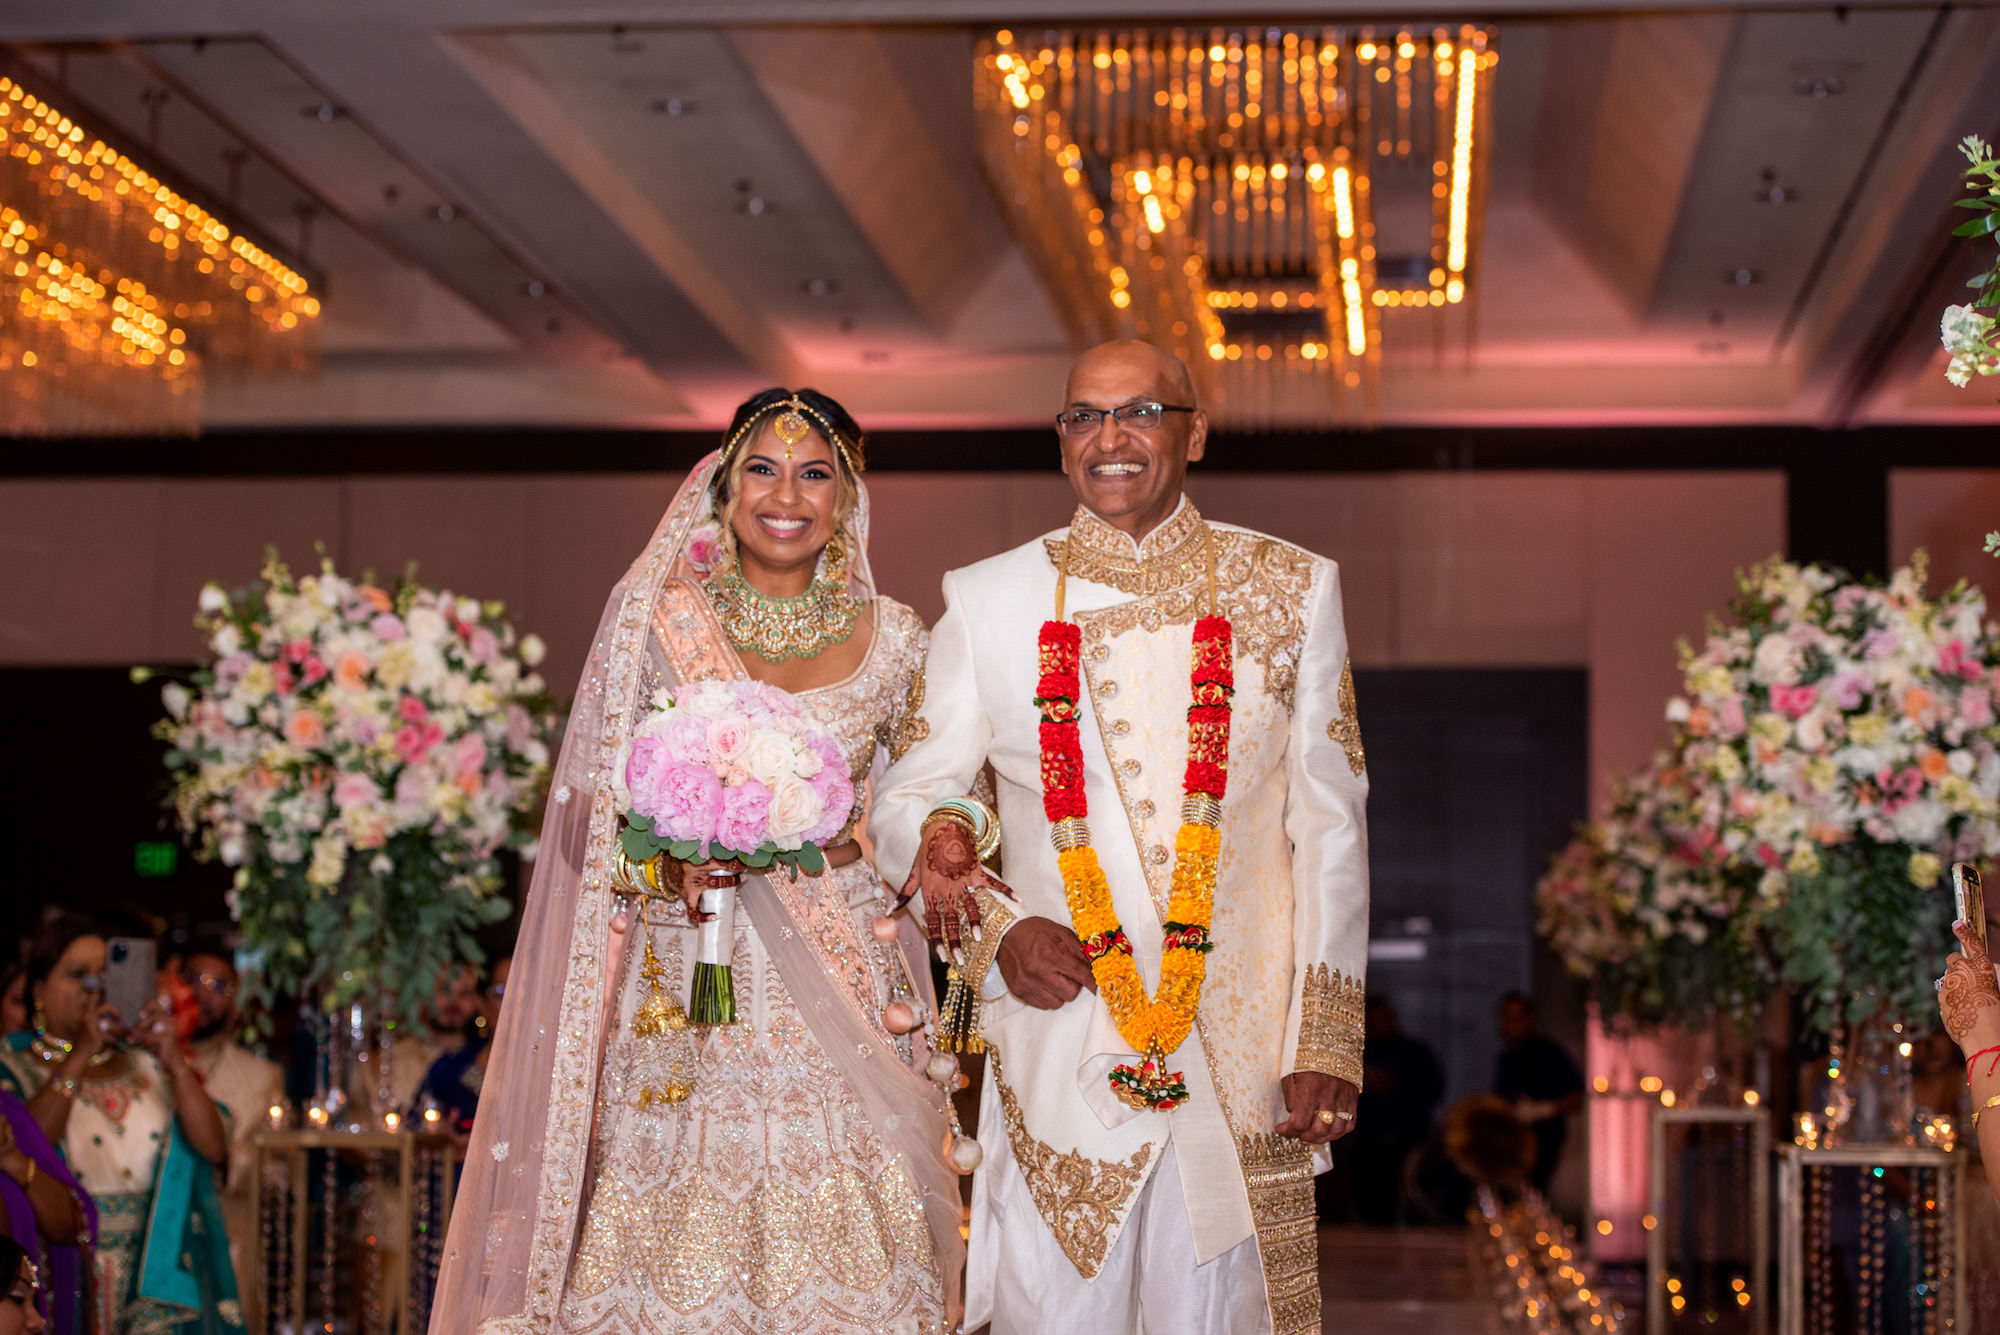 Elegant Bride Walks Down Aisle With Father During Traditional Indian Wedding Ceremony, Bride in Modern Saree With Gold and Ivory Detailing, Head Piece Jewelry, Holding Blush Pink Floral Bouquet | Florida Wedding Venue Hilton Downtown Tampa